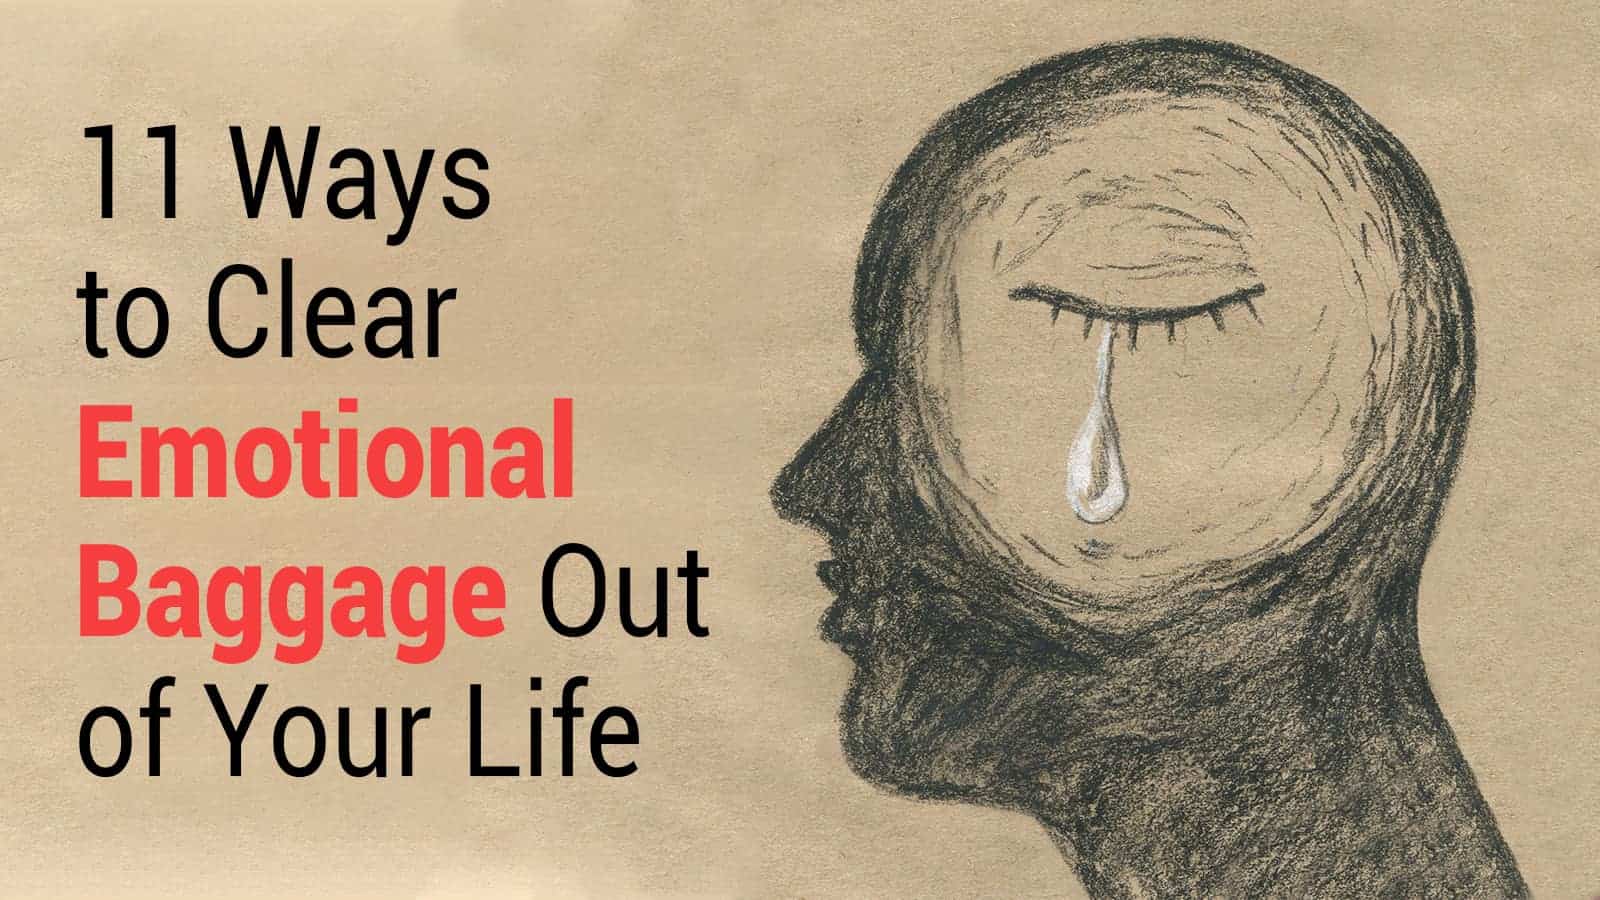 11 Ways to Clear Emotional Baggage Out of Your Life